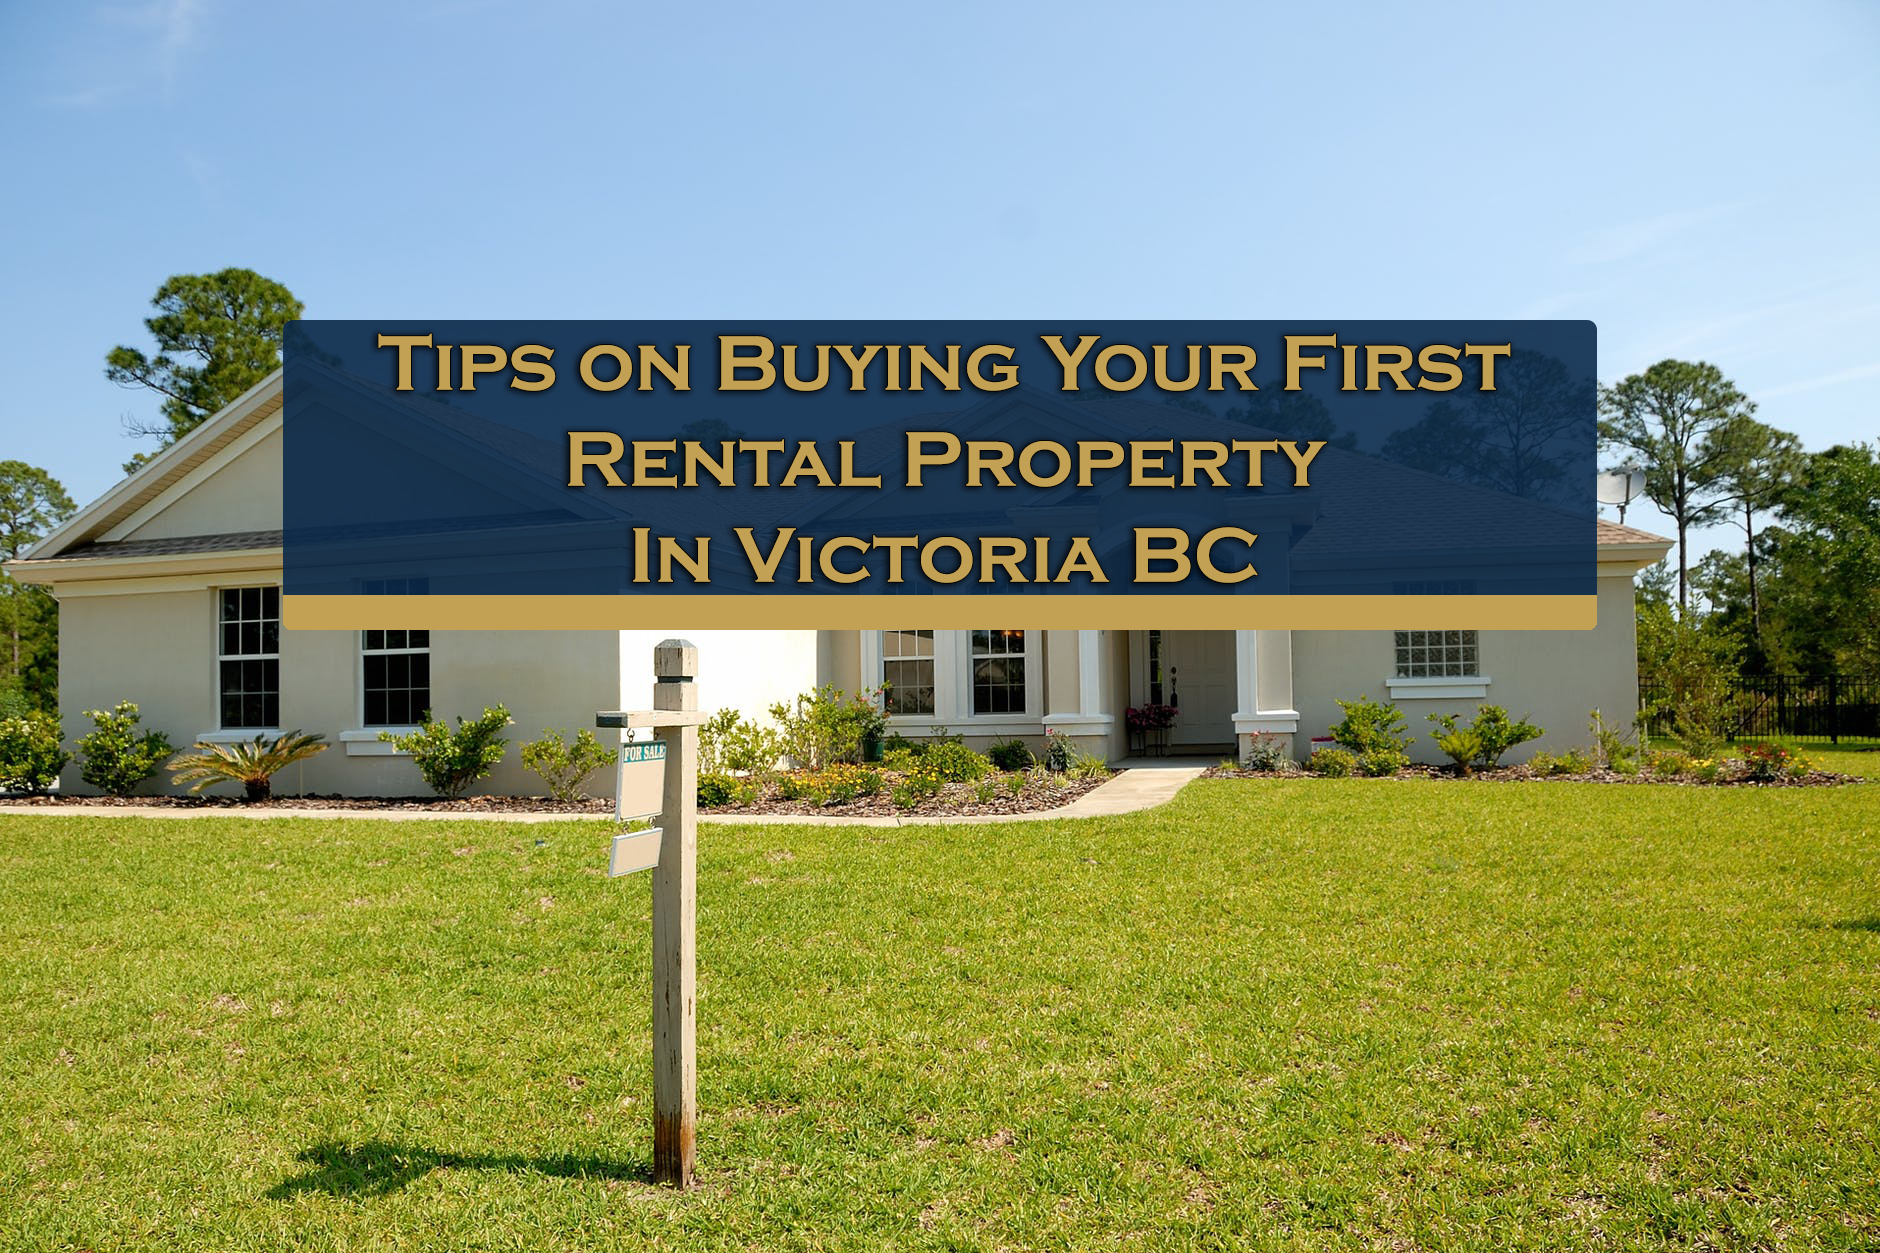 Buying Your First Rental Property in Victoria BC